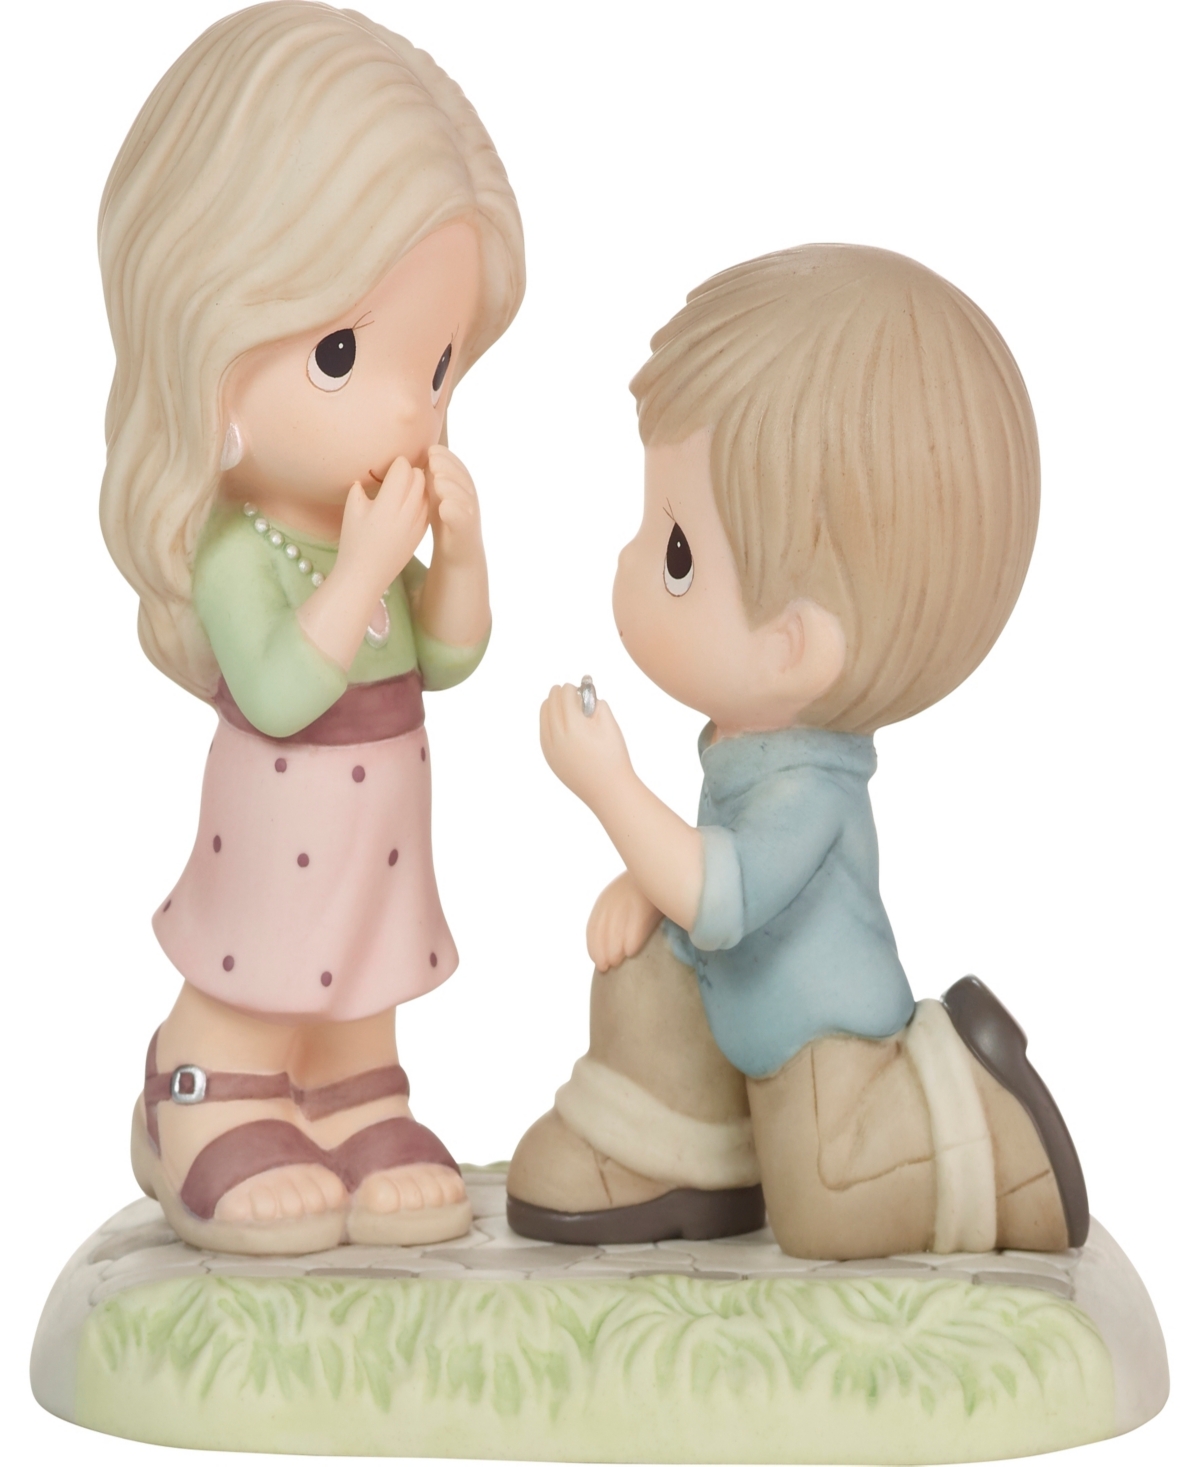 Precious Moments 222007 Will You Be Mine Bisque Porcelain Figurine In Multicolored